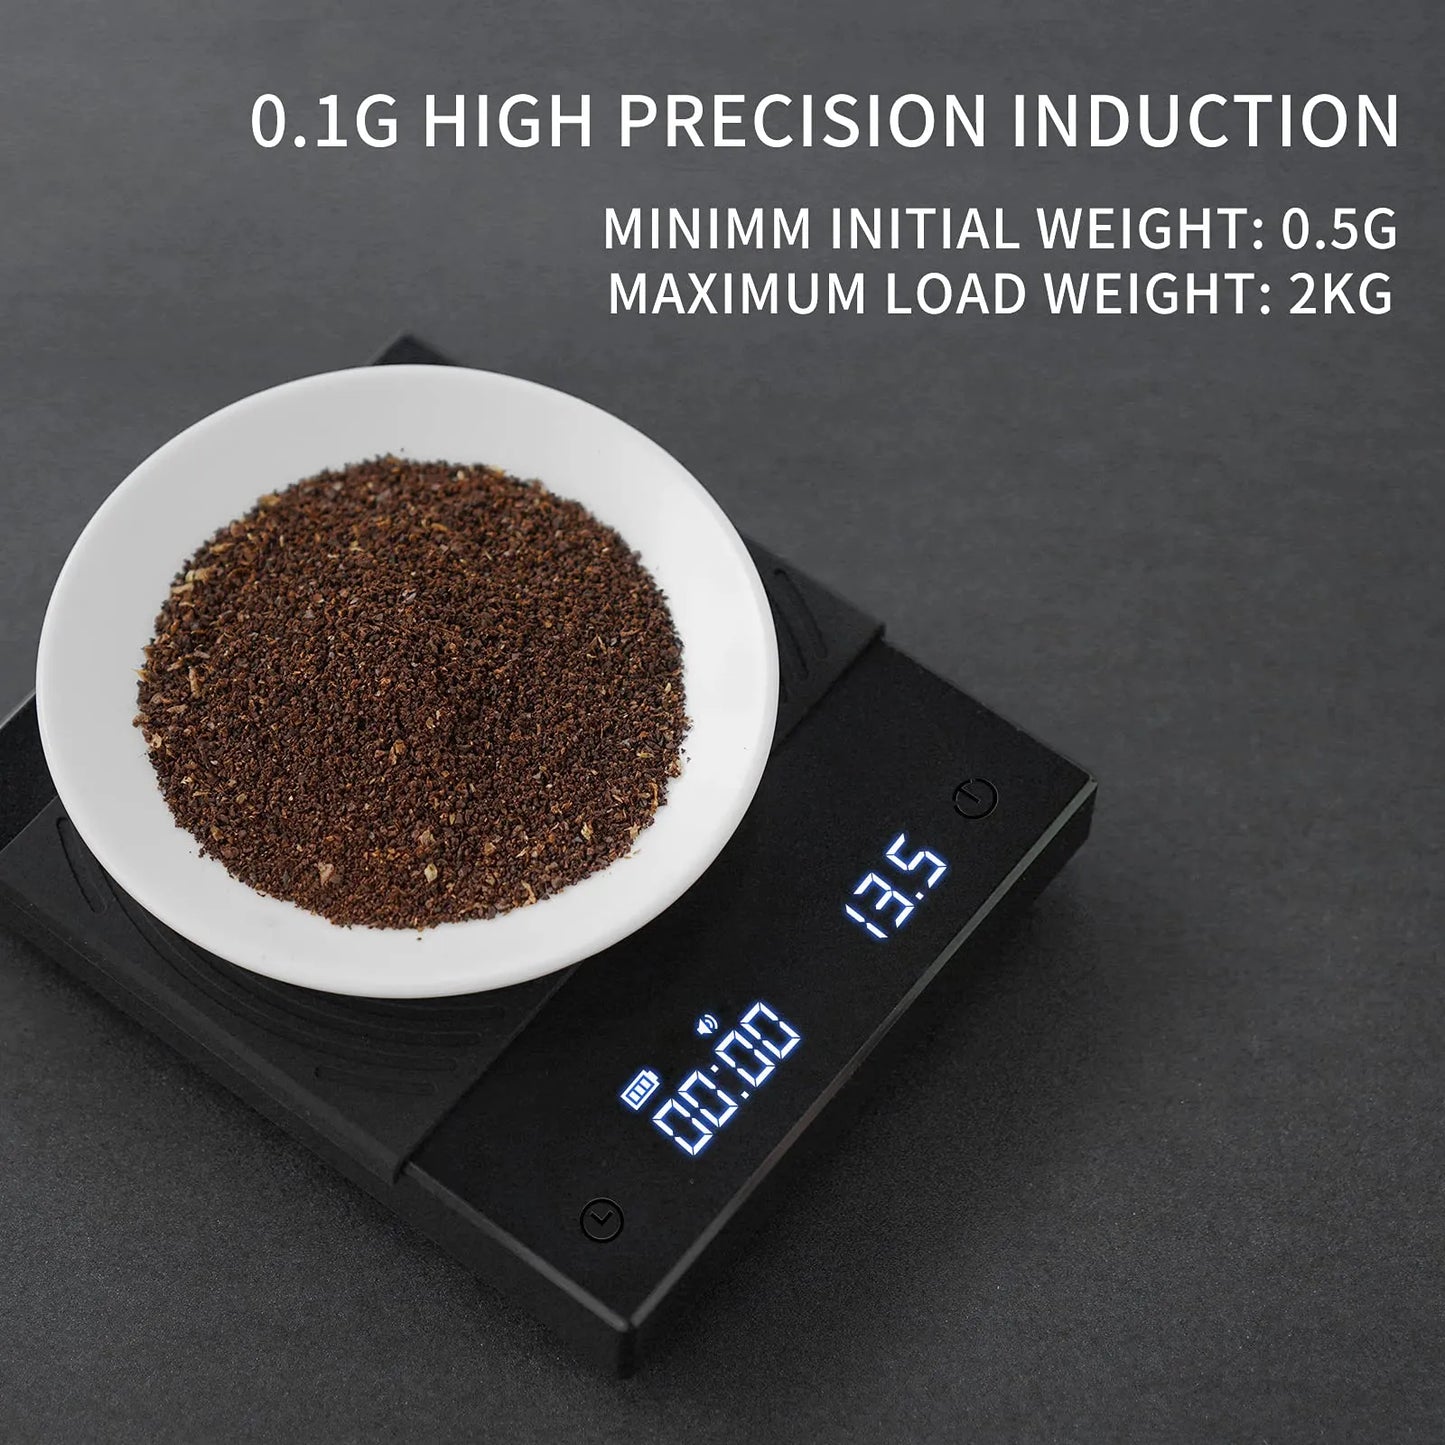 TIMEMORE Basic Plus Black Mirror Pour Over Coffee and Espresso Scale Basic+ Electronic Scale Auto Timer Kitchen scale 0.1g / 2kg